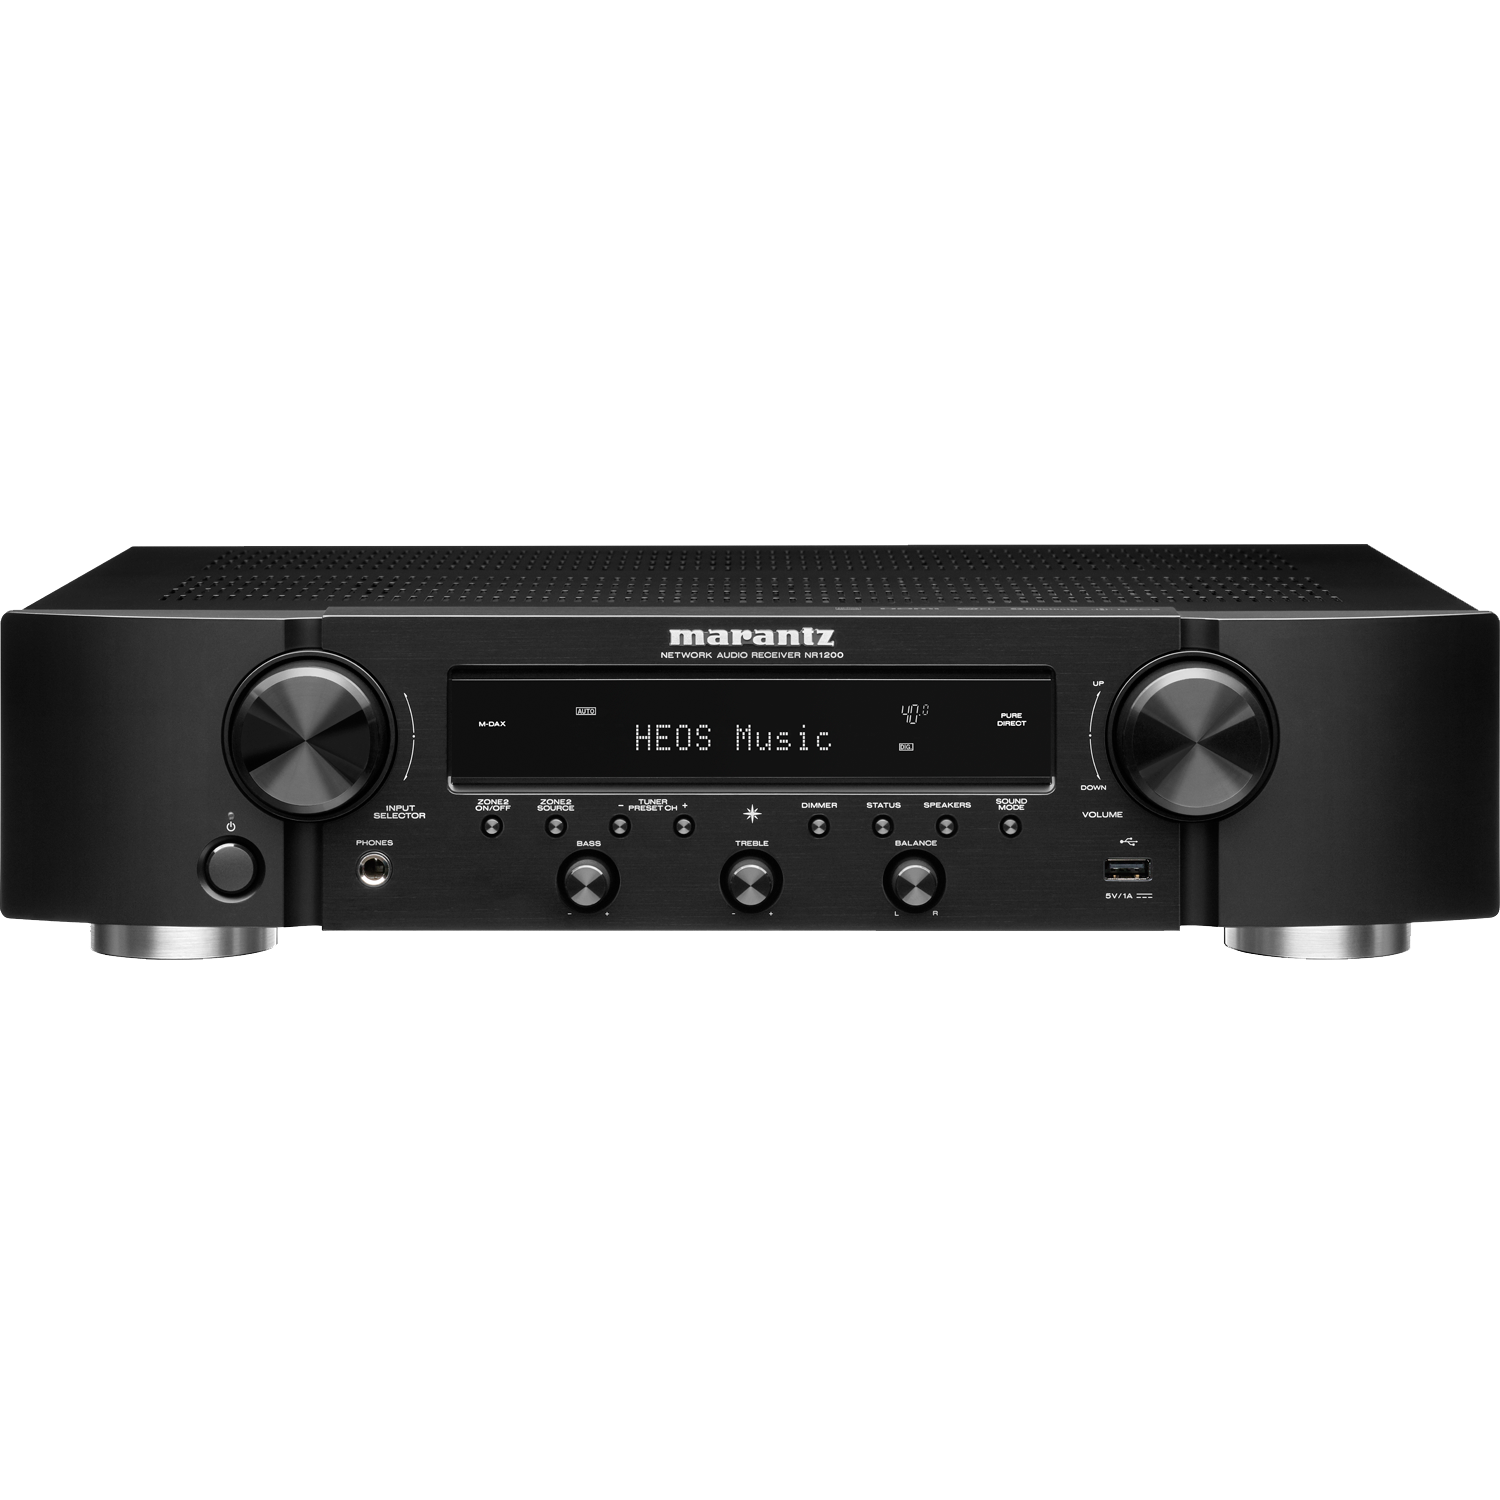 Accessories4less A/V Receiver | 2.1-Channel 70s Stereo MARANTZ Network